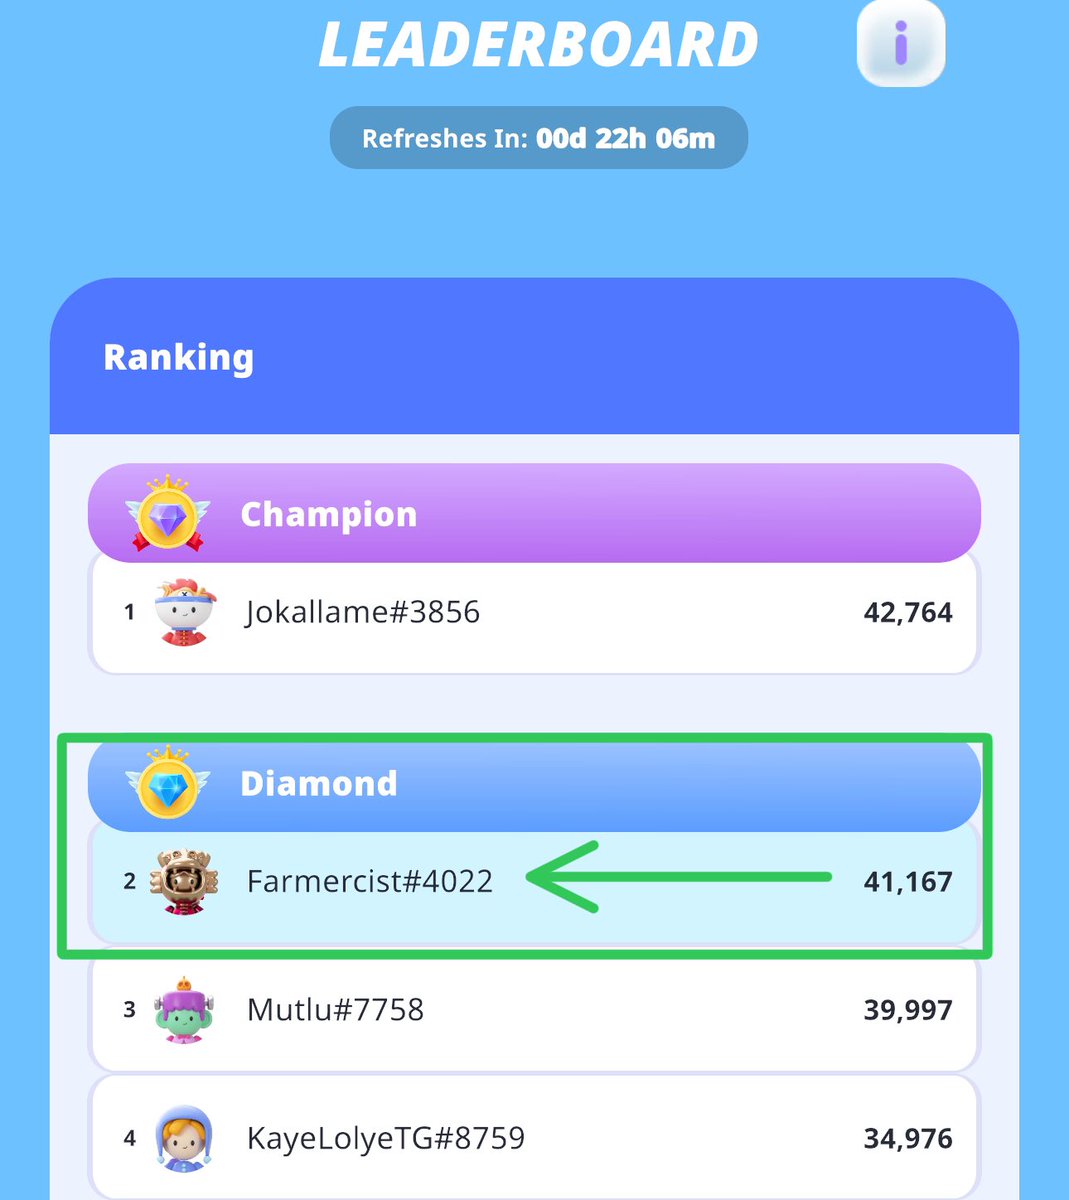 Does this mean I’m ranked number 2 on the $BUBBLE leaderboard? Or it’s just on my own end 🤔 Please send screenshot of what leaderboard looks like on your own end so I’ll know I’m not deceiving myself But in the meantime Farmercist is actually a pro gamer 😗 Win all day 🚀